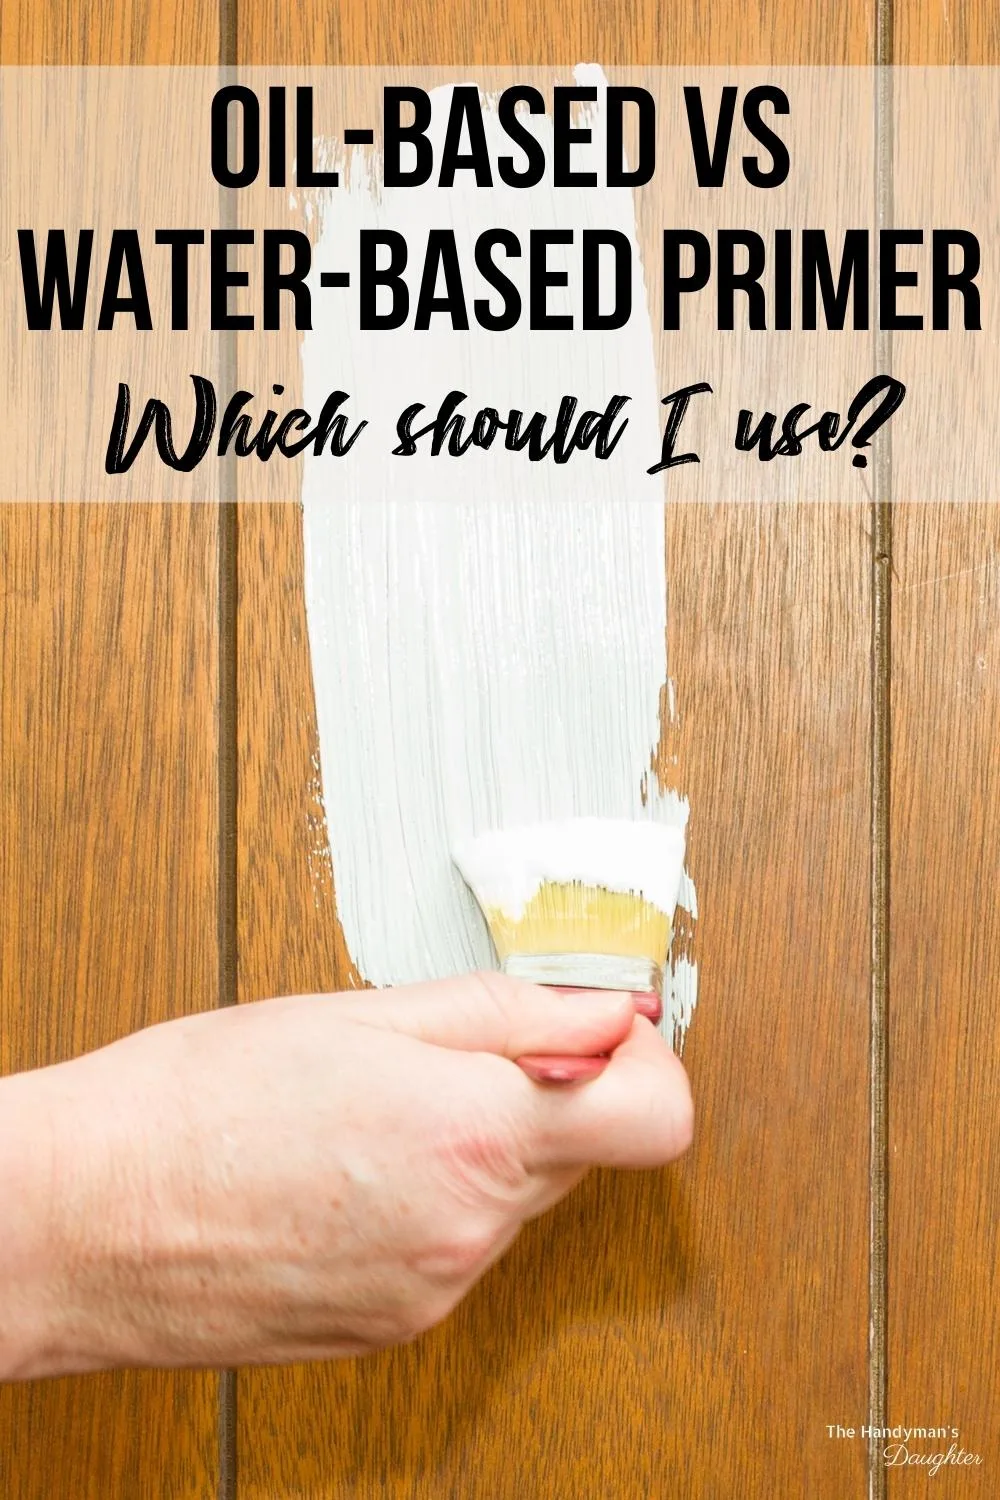 Water-based Paint Vs. Oil-Based Paint - How to Choose the Right Paint for  Your Project